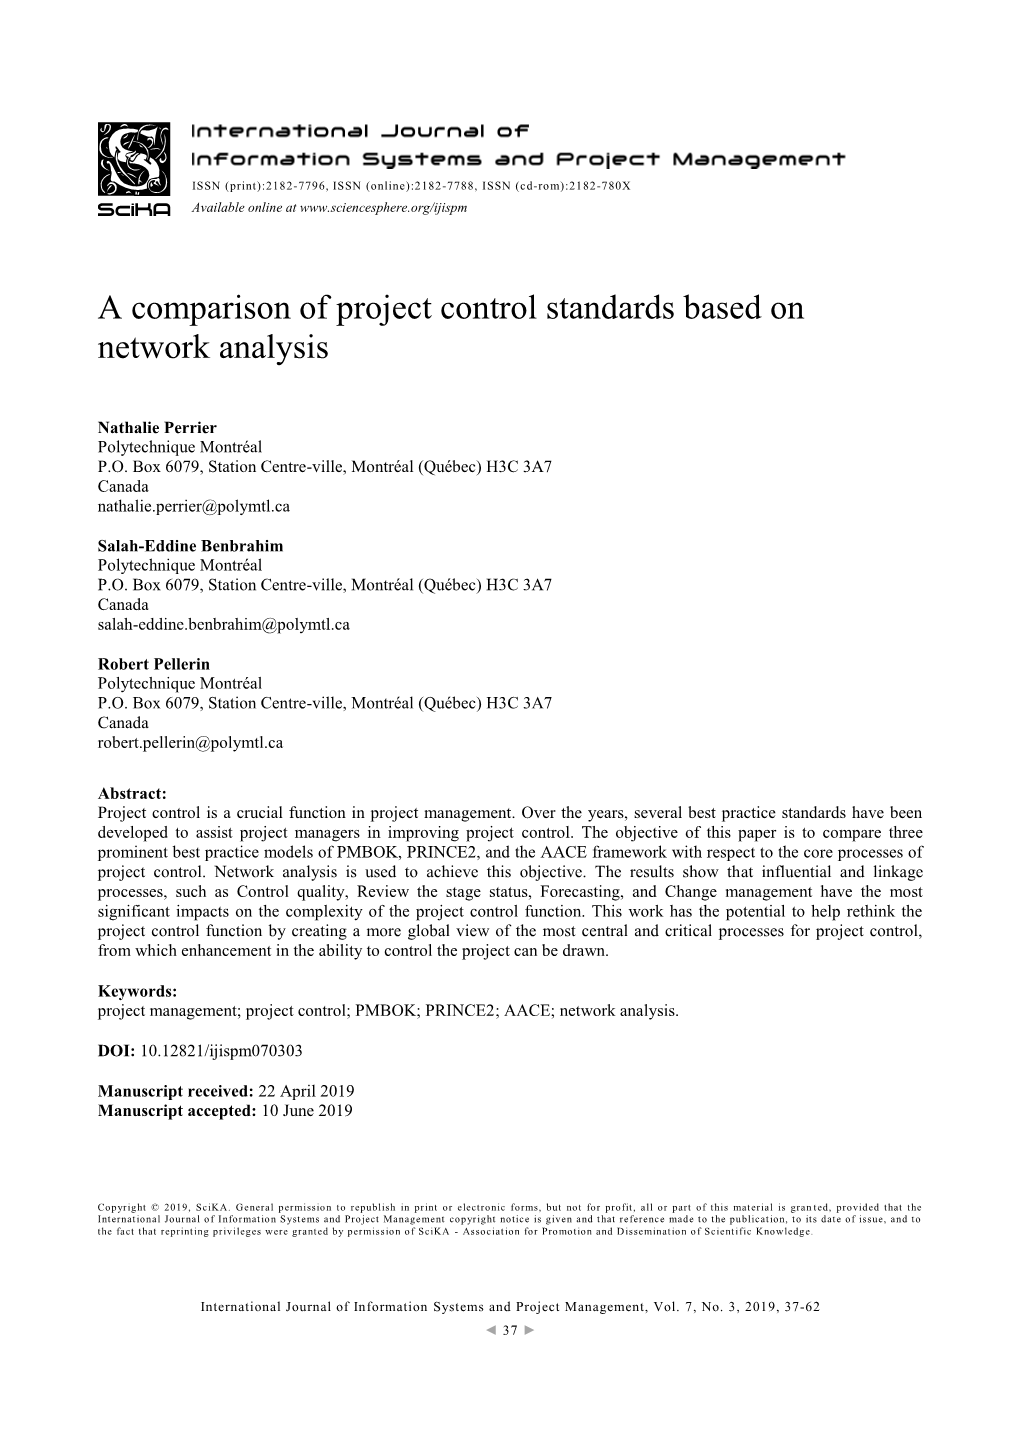 A Comparison of Project Control Standards Based on Network Analysis